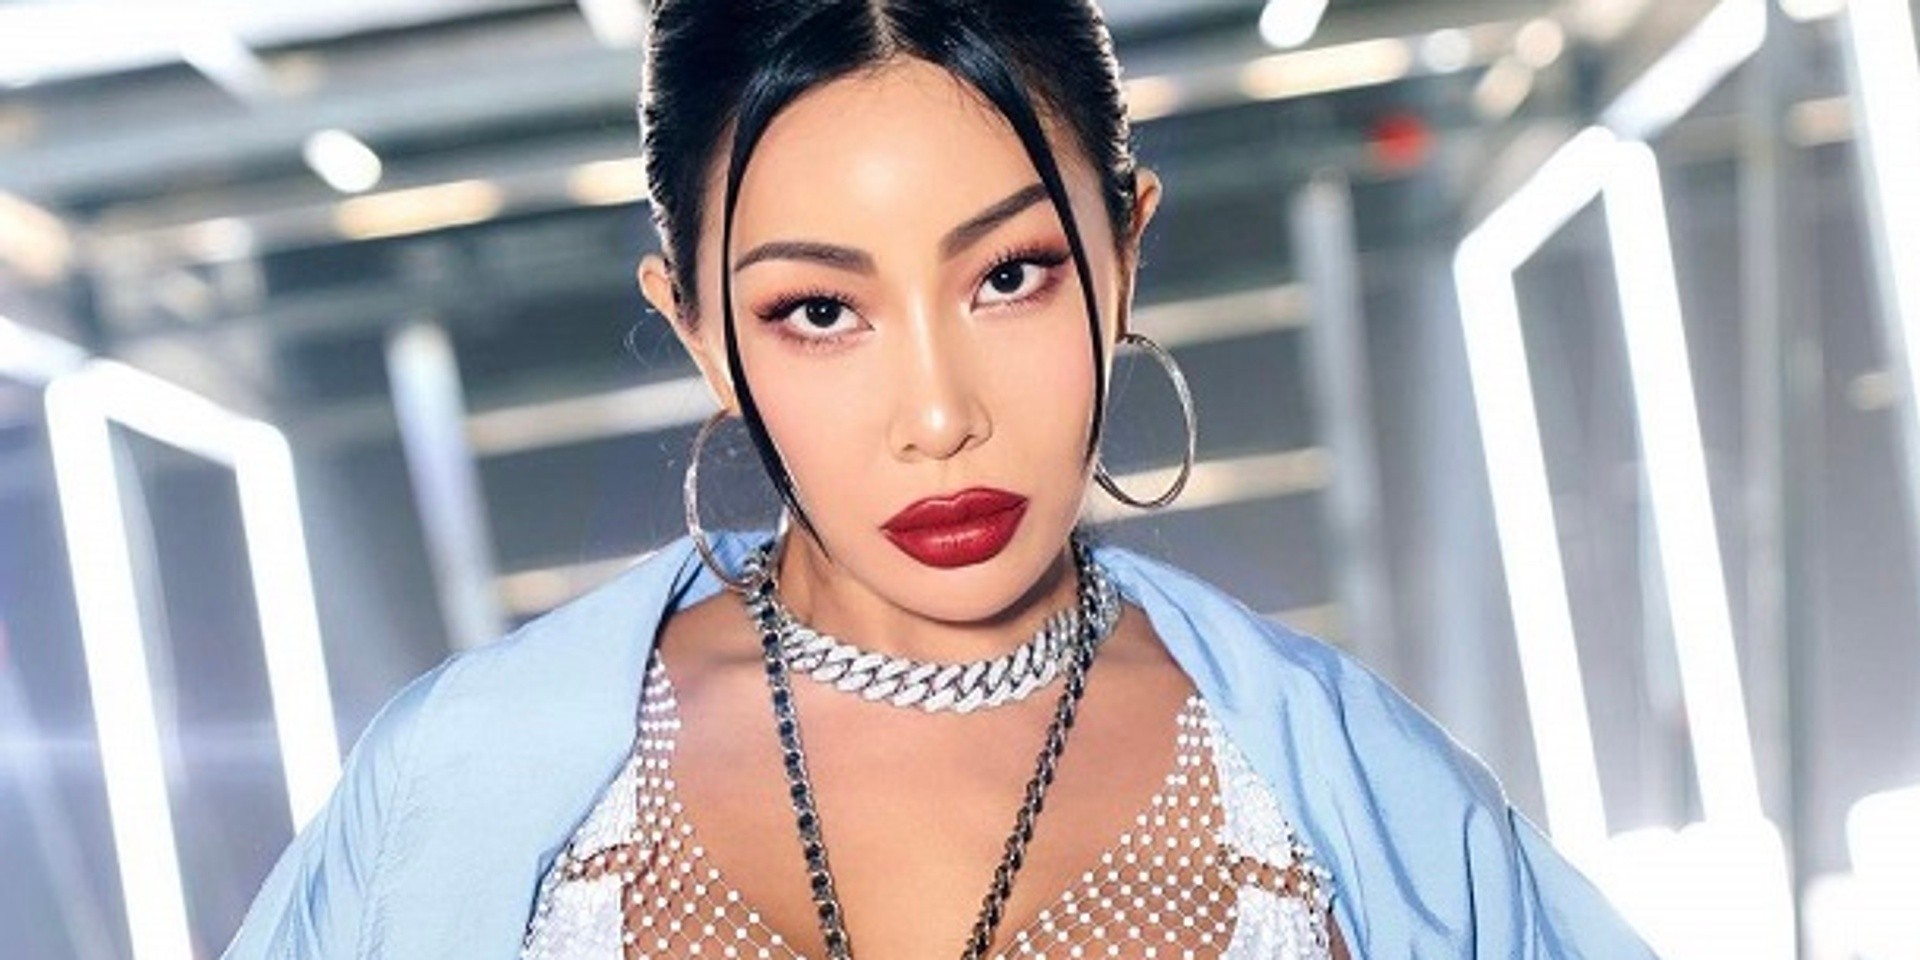 Jessi is hosting a digital performance this March, here's how to get tickets